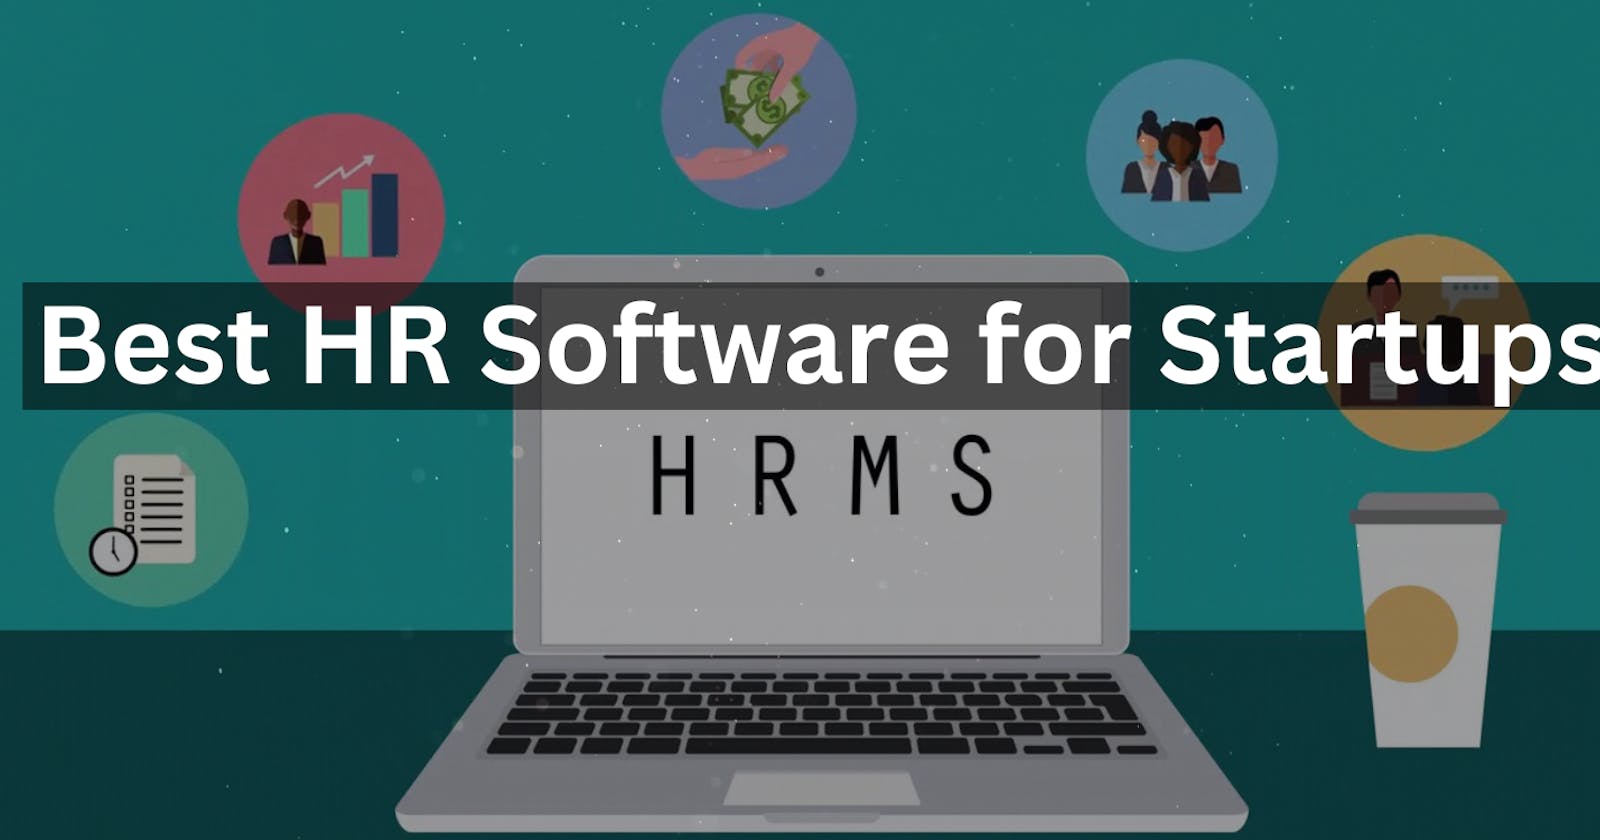 Which is the best HR software for startups?